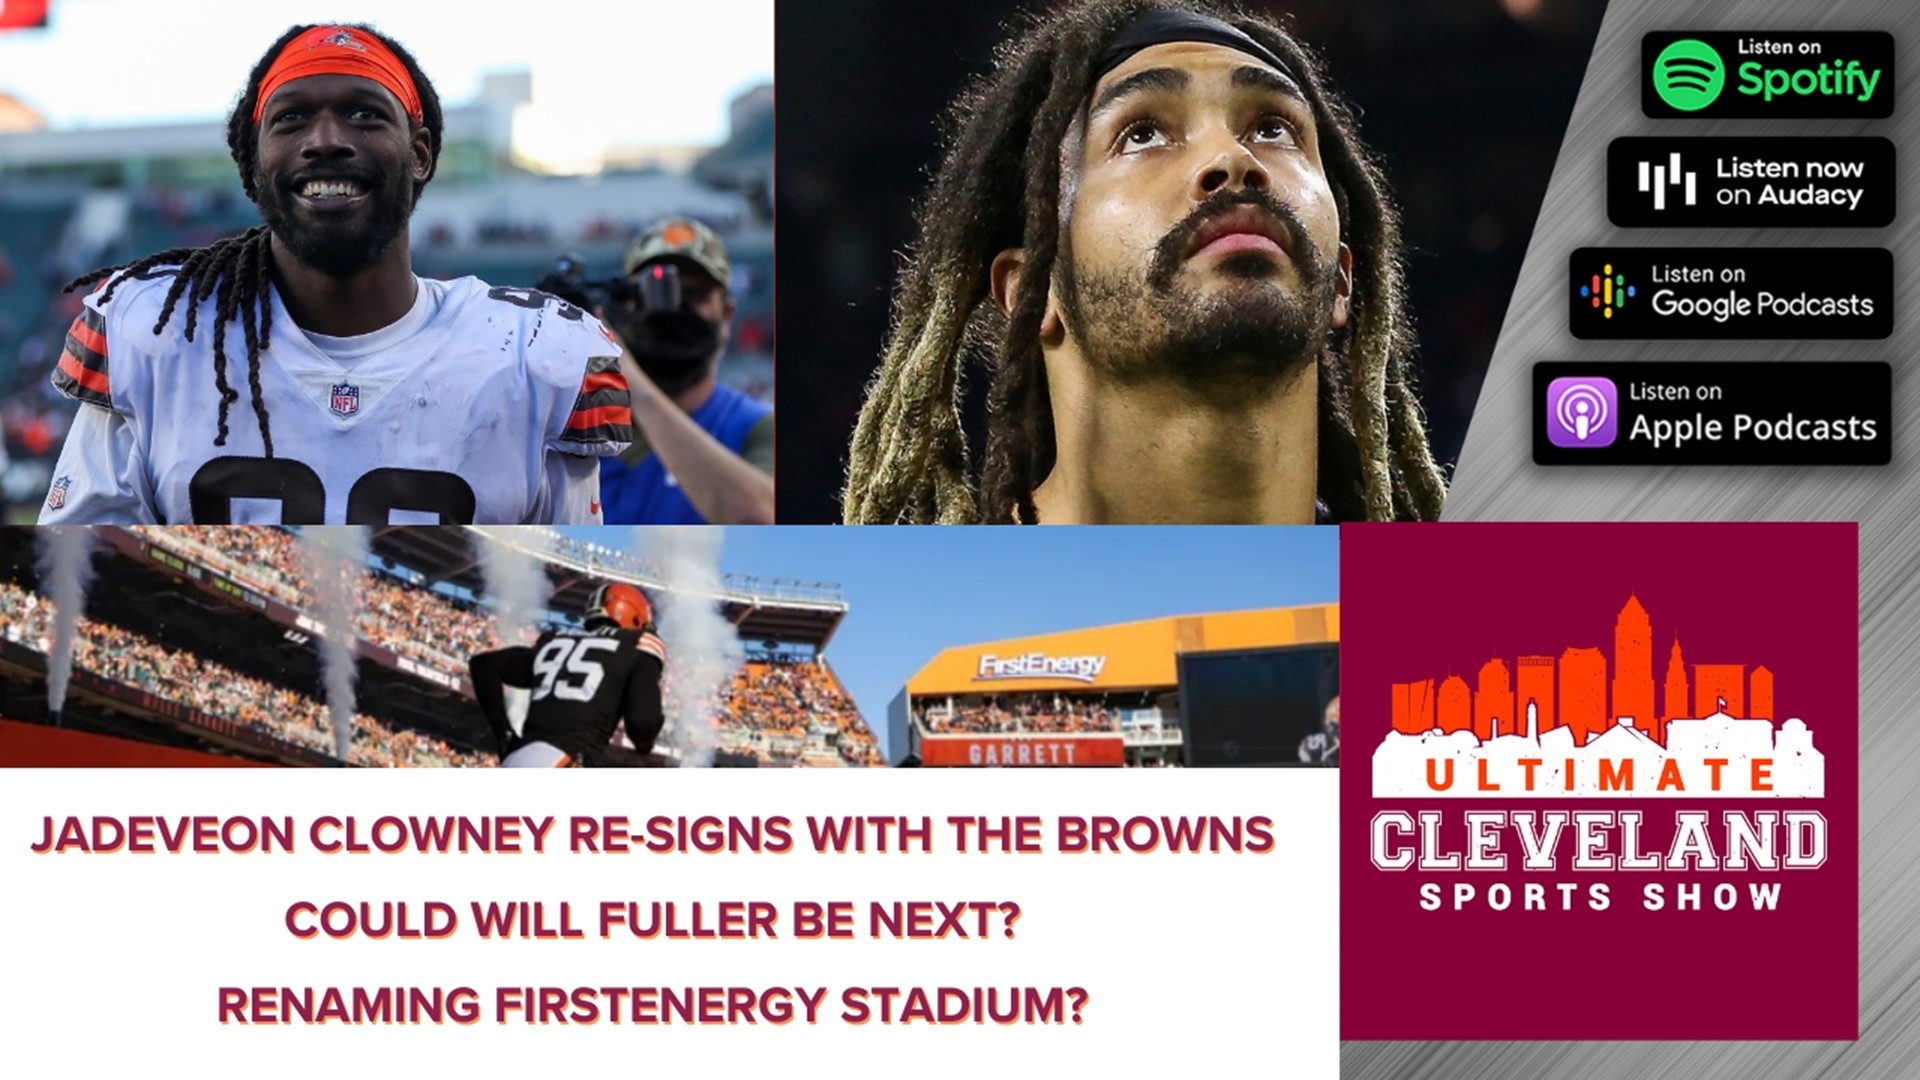 Jadeveon Clowney re-signs with the Browns. FirstEnergy stadium's name removal request due to $60M bribery scandal and is Will Fuller possibly going to the Browns?